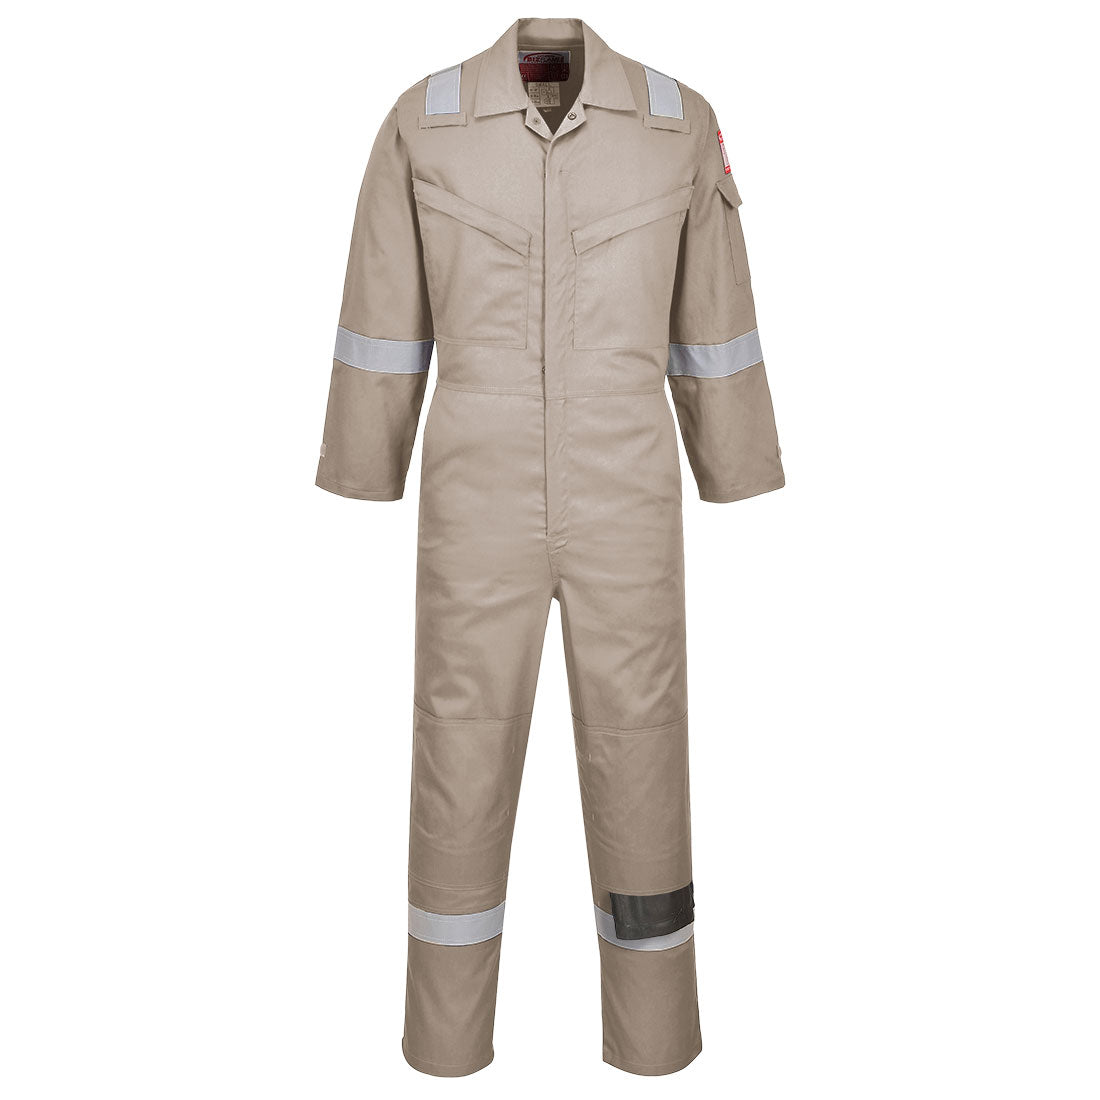 Flame Resistant Super Light Weight Anti-Static Coverall 210g  (FR21)